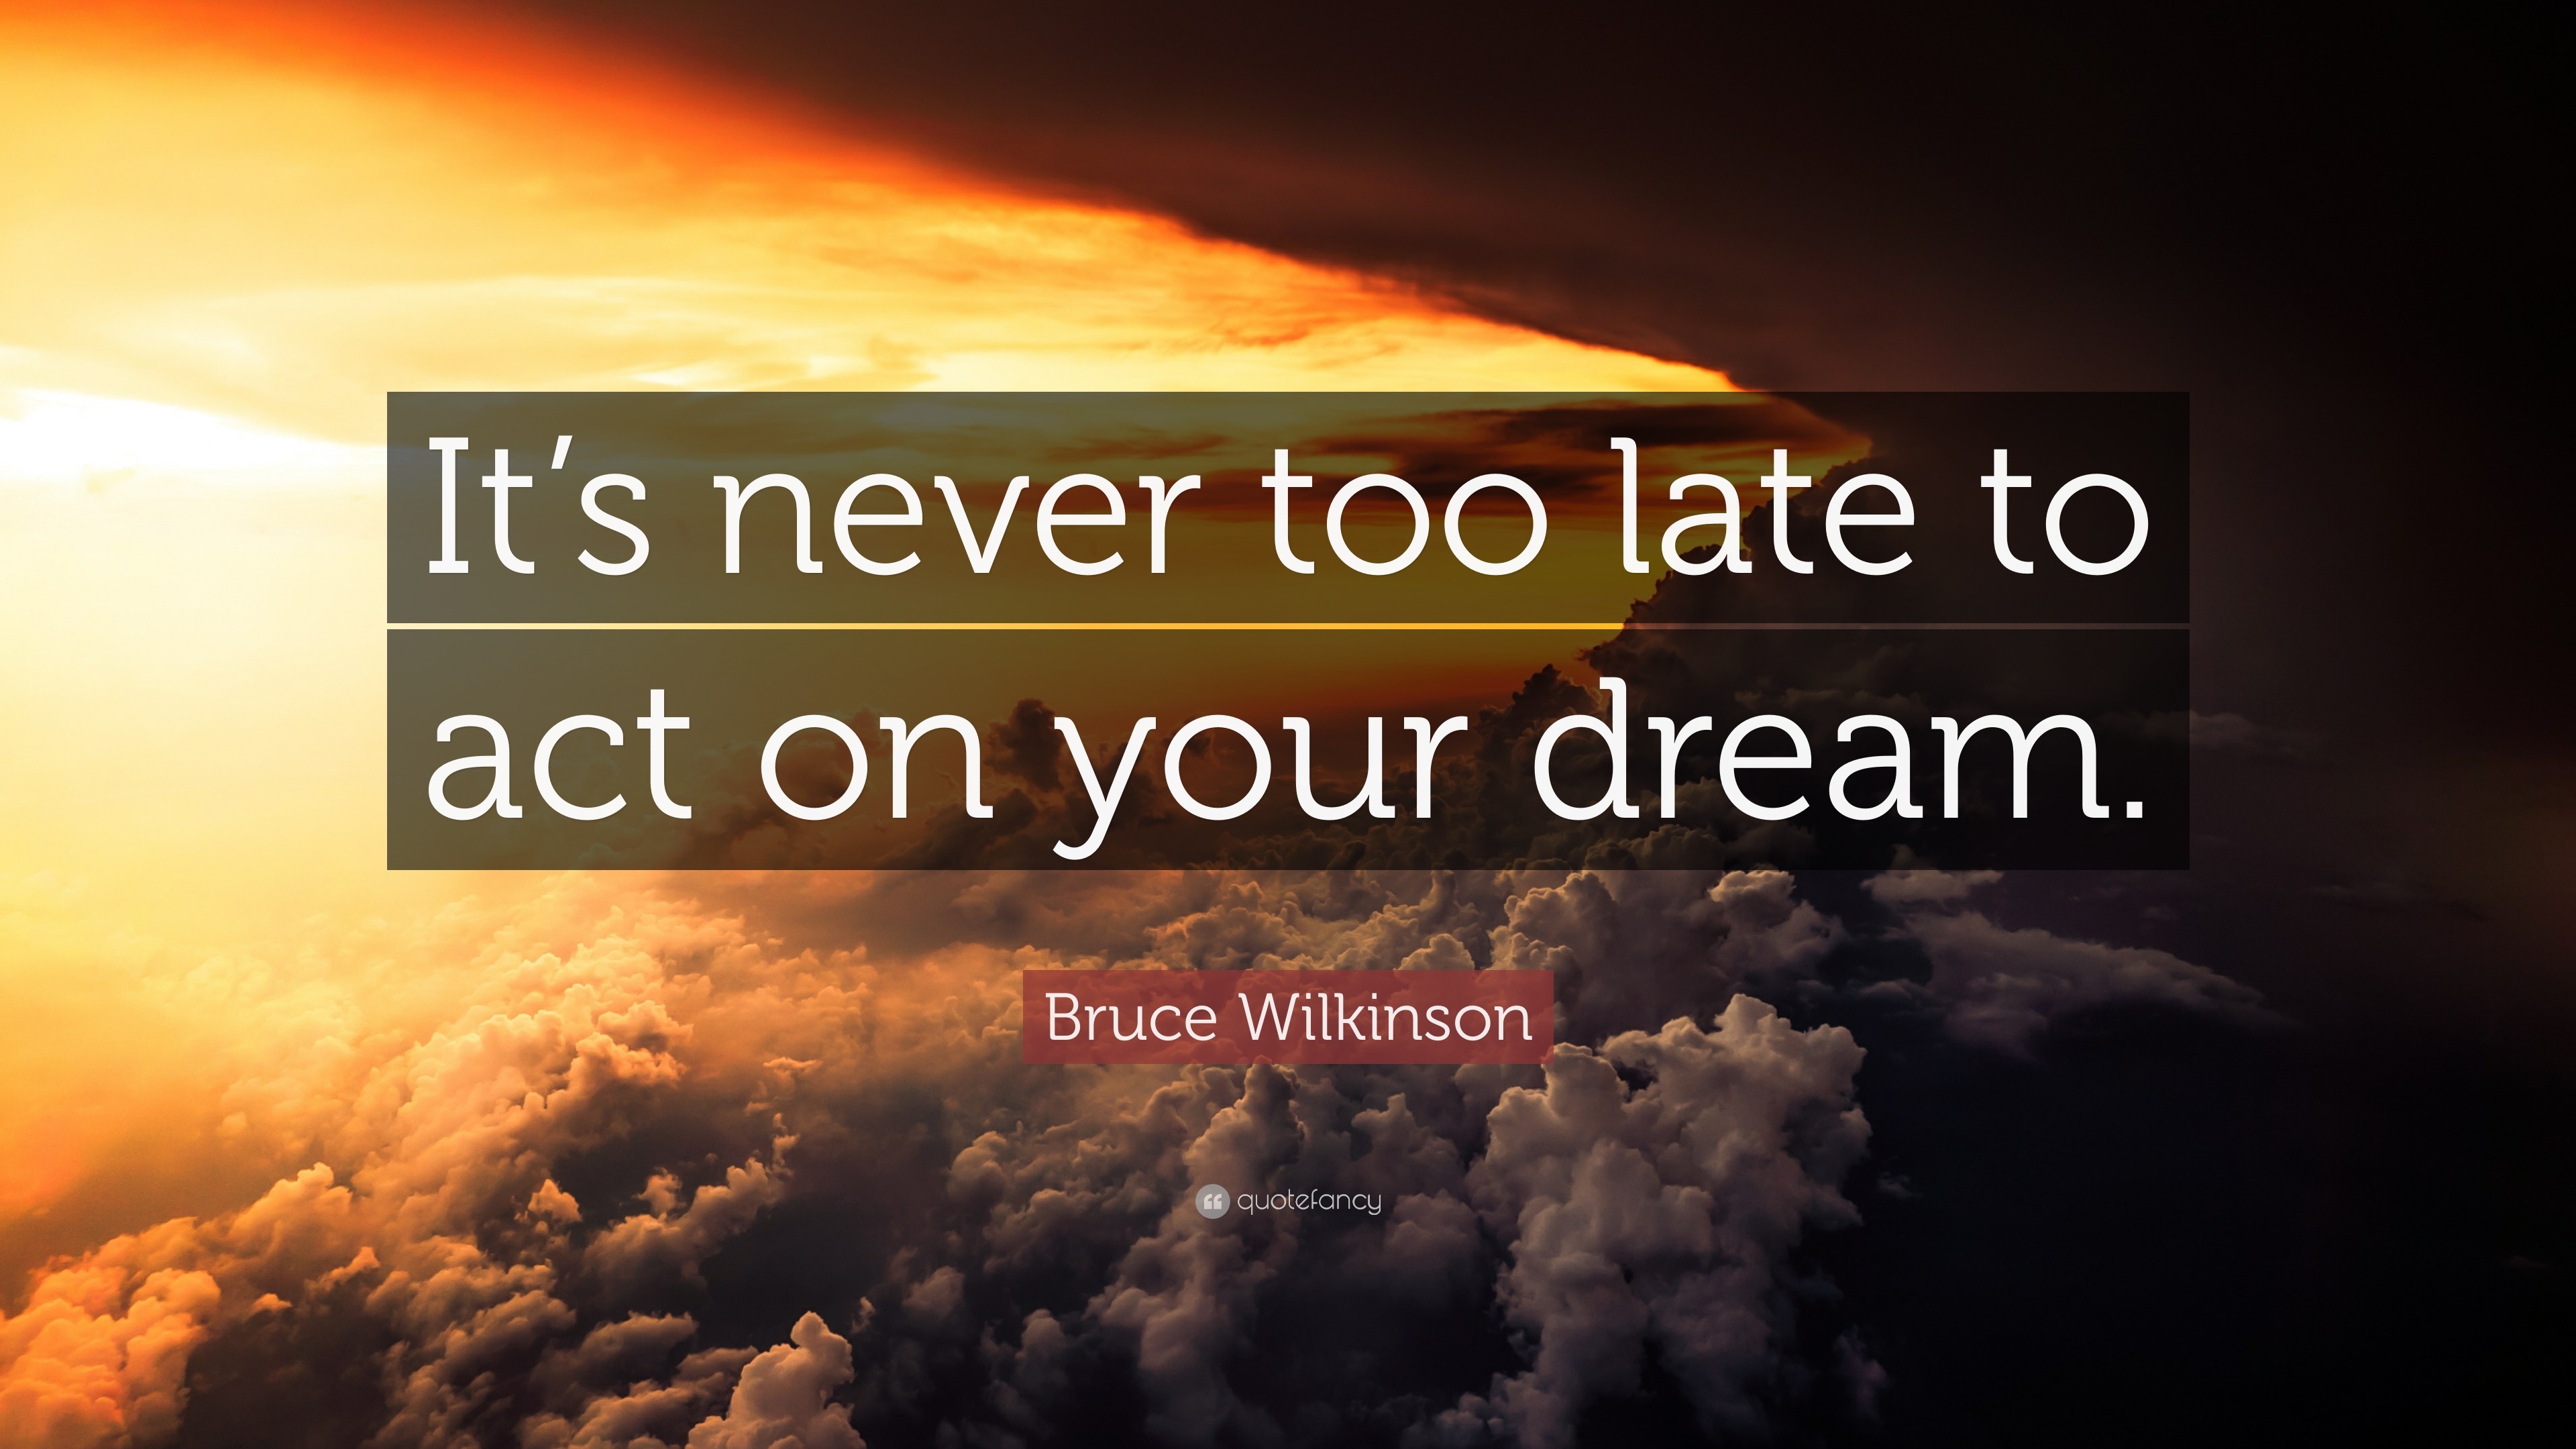 Bruce Wilkinson Quote: “It’s never too late to act on your dream.”